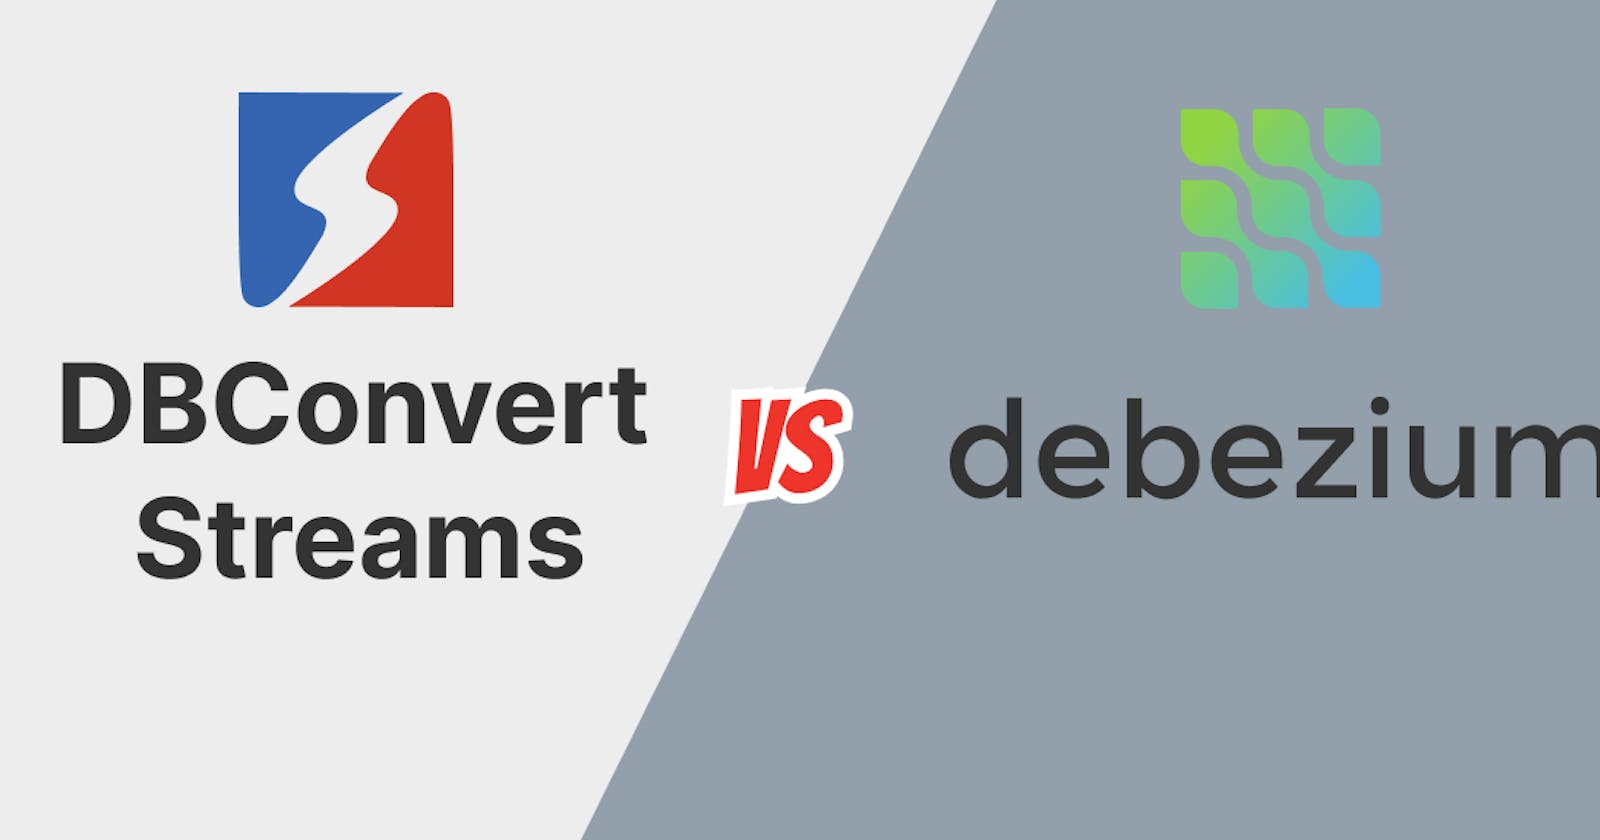 Debezium vs DBConvert Streams: Which Offers Superior Performance in Data Streaming?